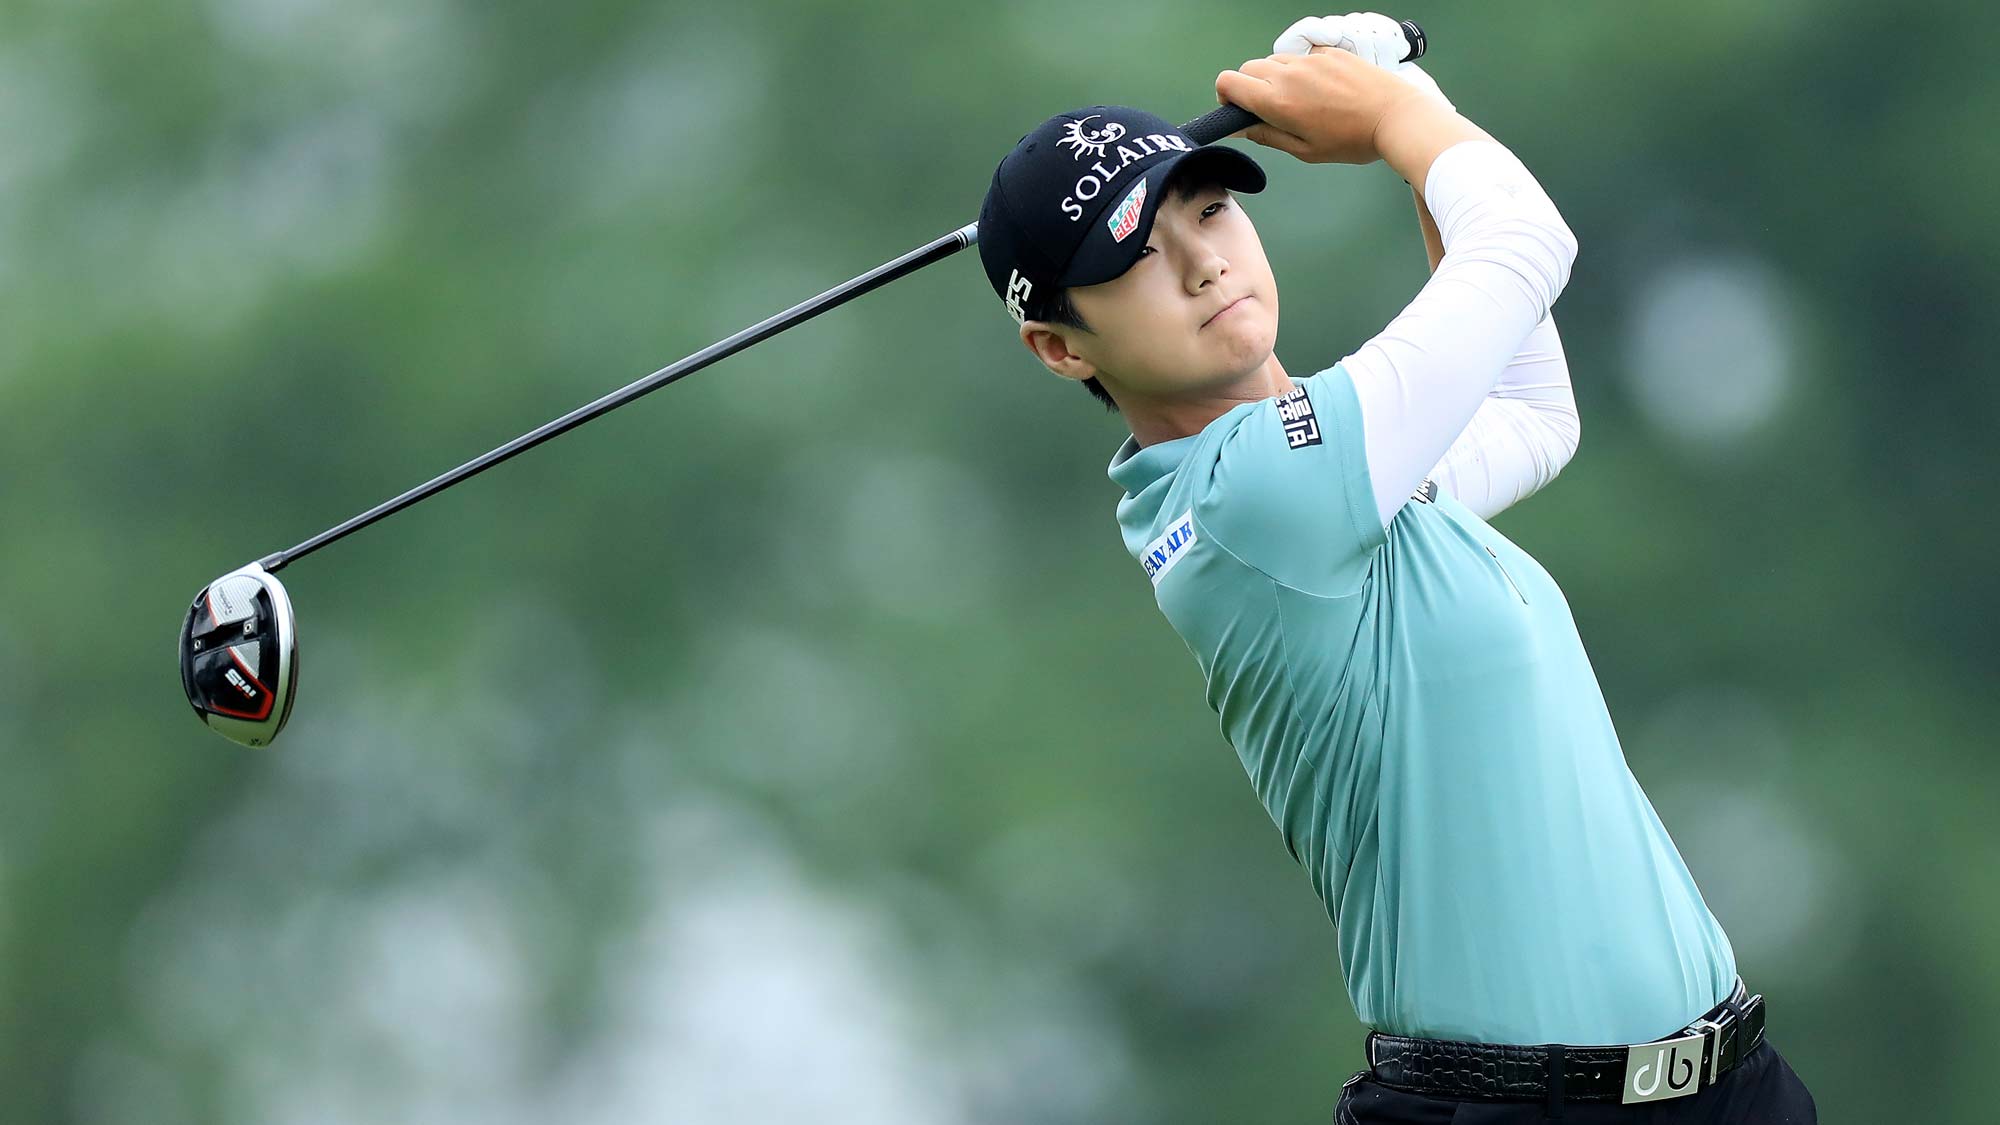 Sung Hyun Park of South Korea plays her tee shot on the par 5, third hole during the final round of the 2019 KPMG Women's PGA Championship